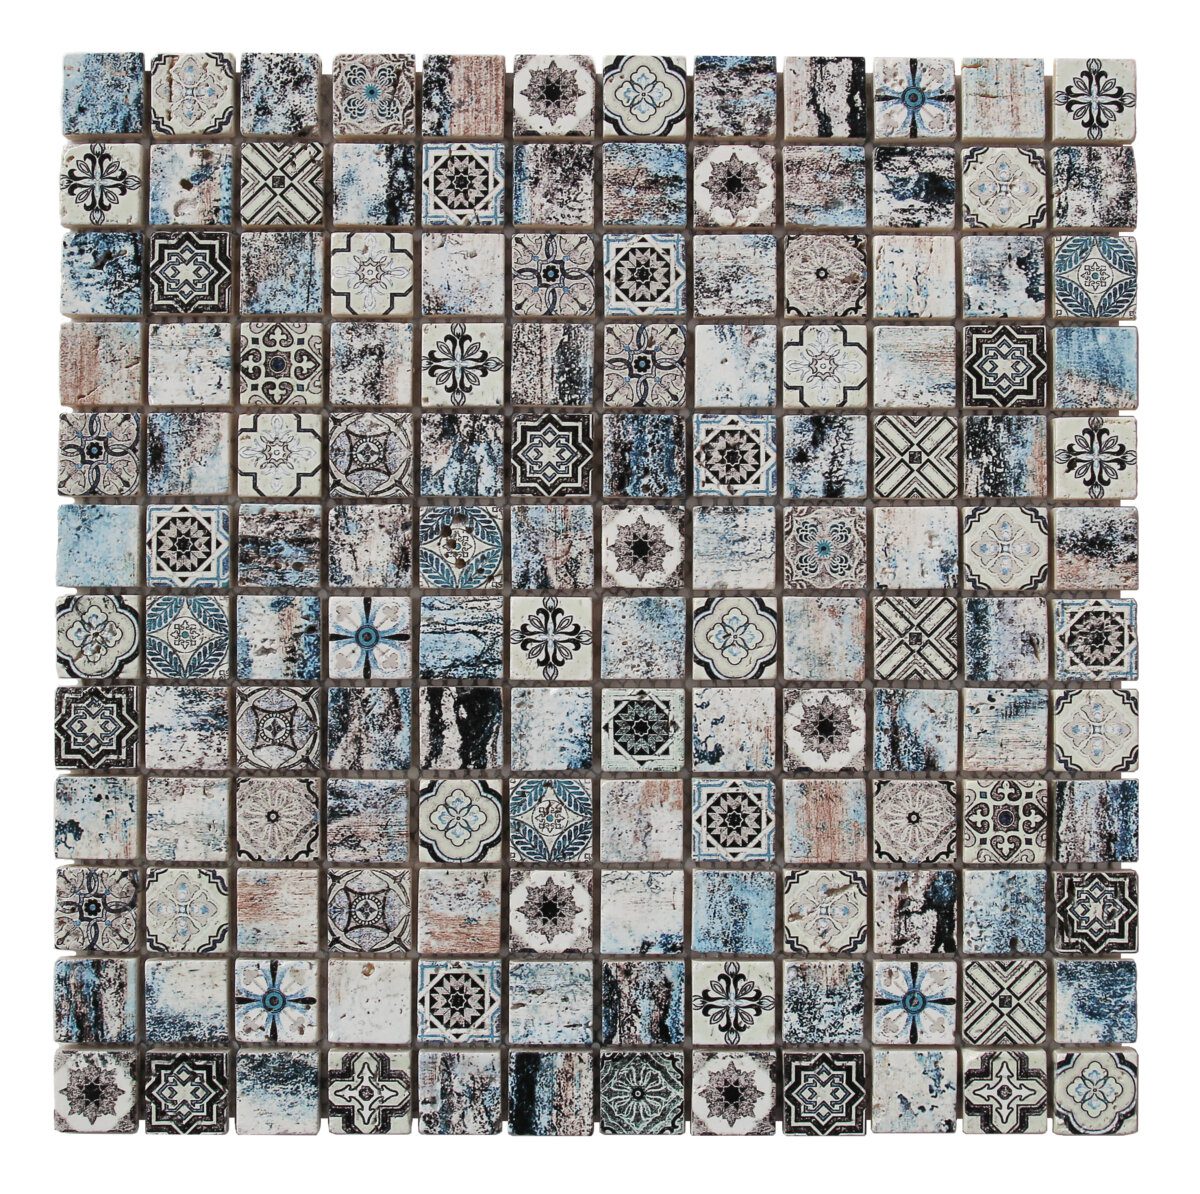 GS-SG104 Global Stone Galaxy Injet Marble Mosaic 300x300mm_Stiles_Product_Image